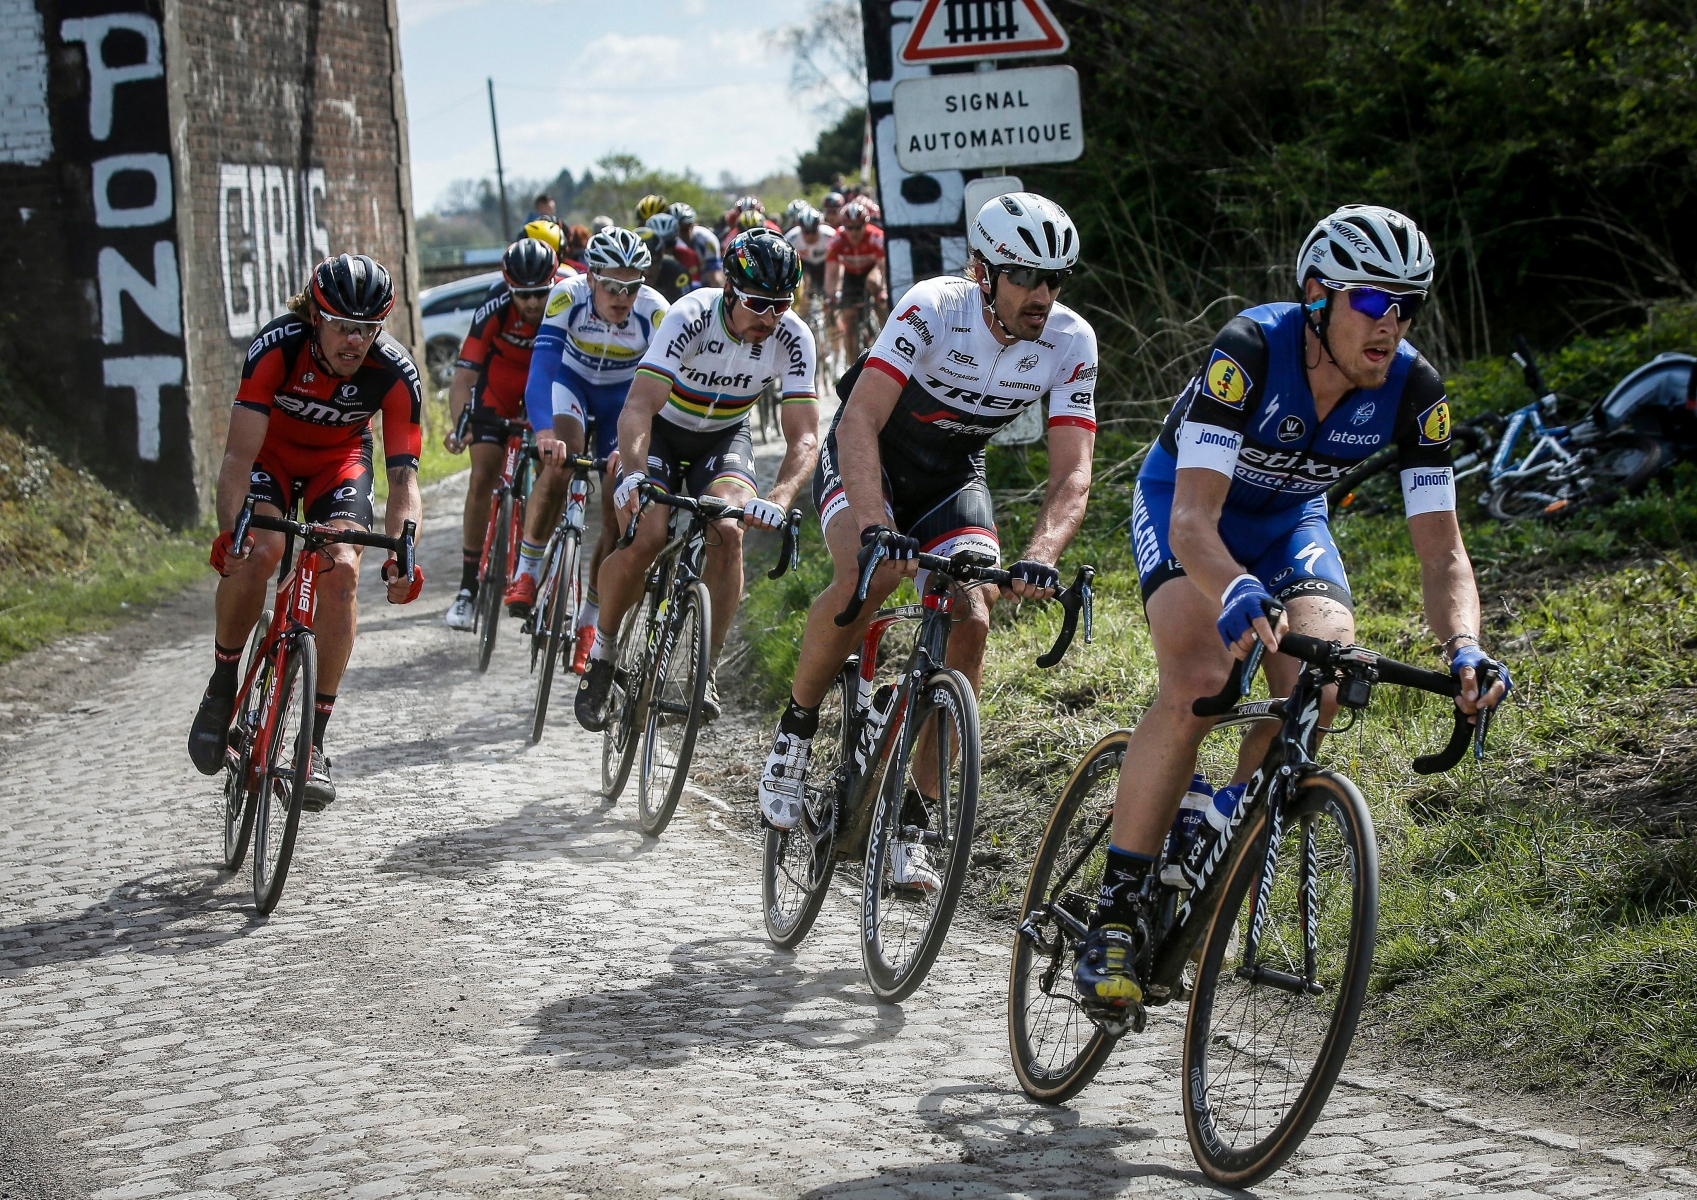 epa05252716 Trek-Segafredo team ride Fabian Cancellara of Switzerland (2-R) and Tinkoff rider Peter Sagan of Slovakia   (3-R) cycle with the pack through a cobblestone section during the 114th Paris Roubaix cycling race, France, 10 April 2016.  EPA/ETIENNE LAURENT FRANCE CYCLING PARIS-ROUBAIX 2016